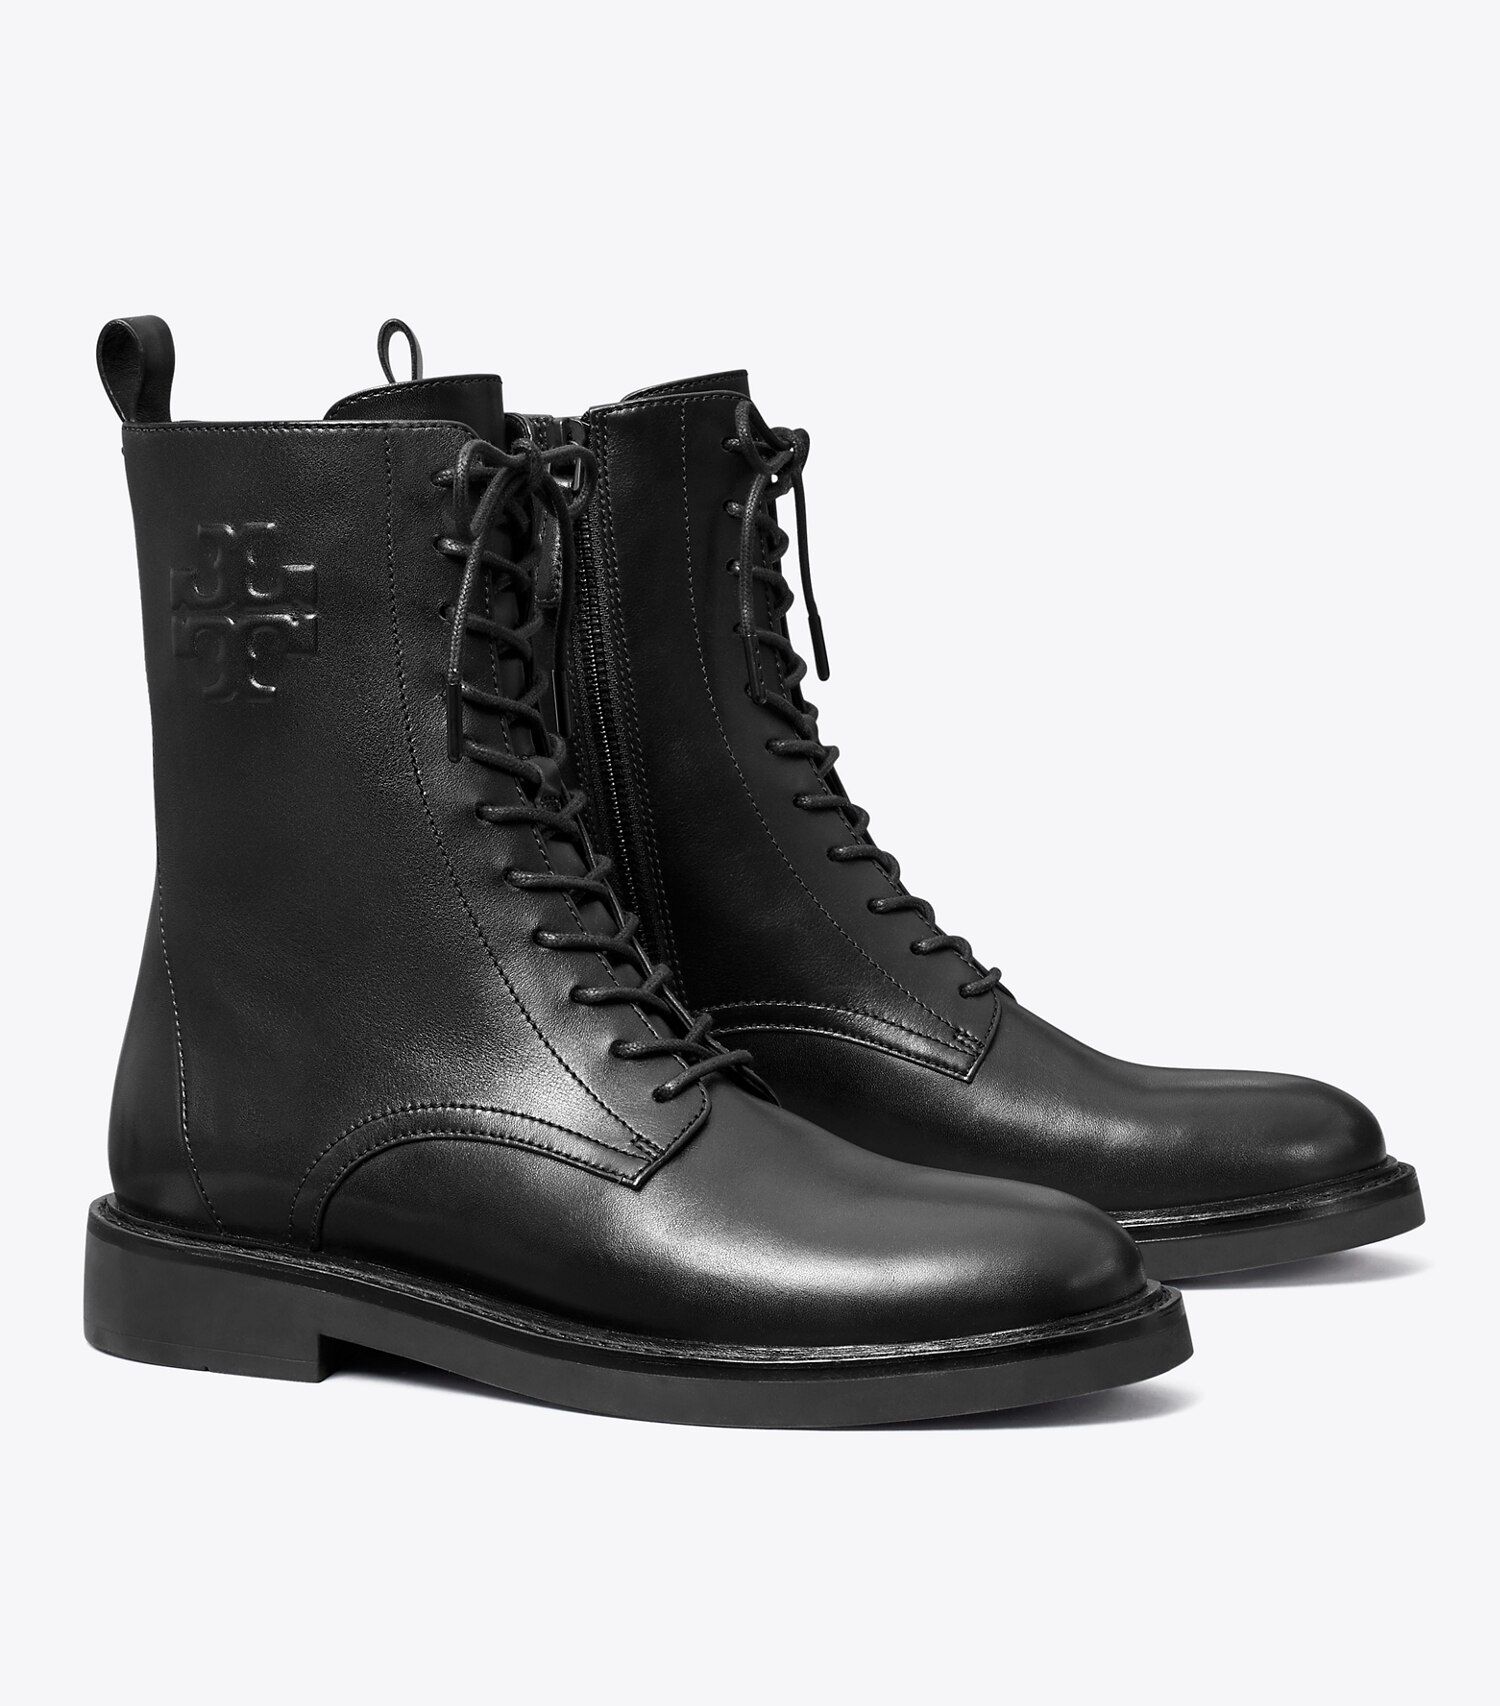 Double T Combat Boot: Women's Designer Ankle Boots | Tory Burch | Tory Burch (US)